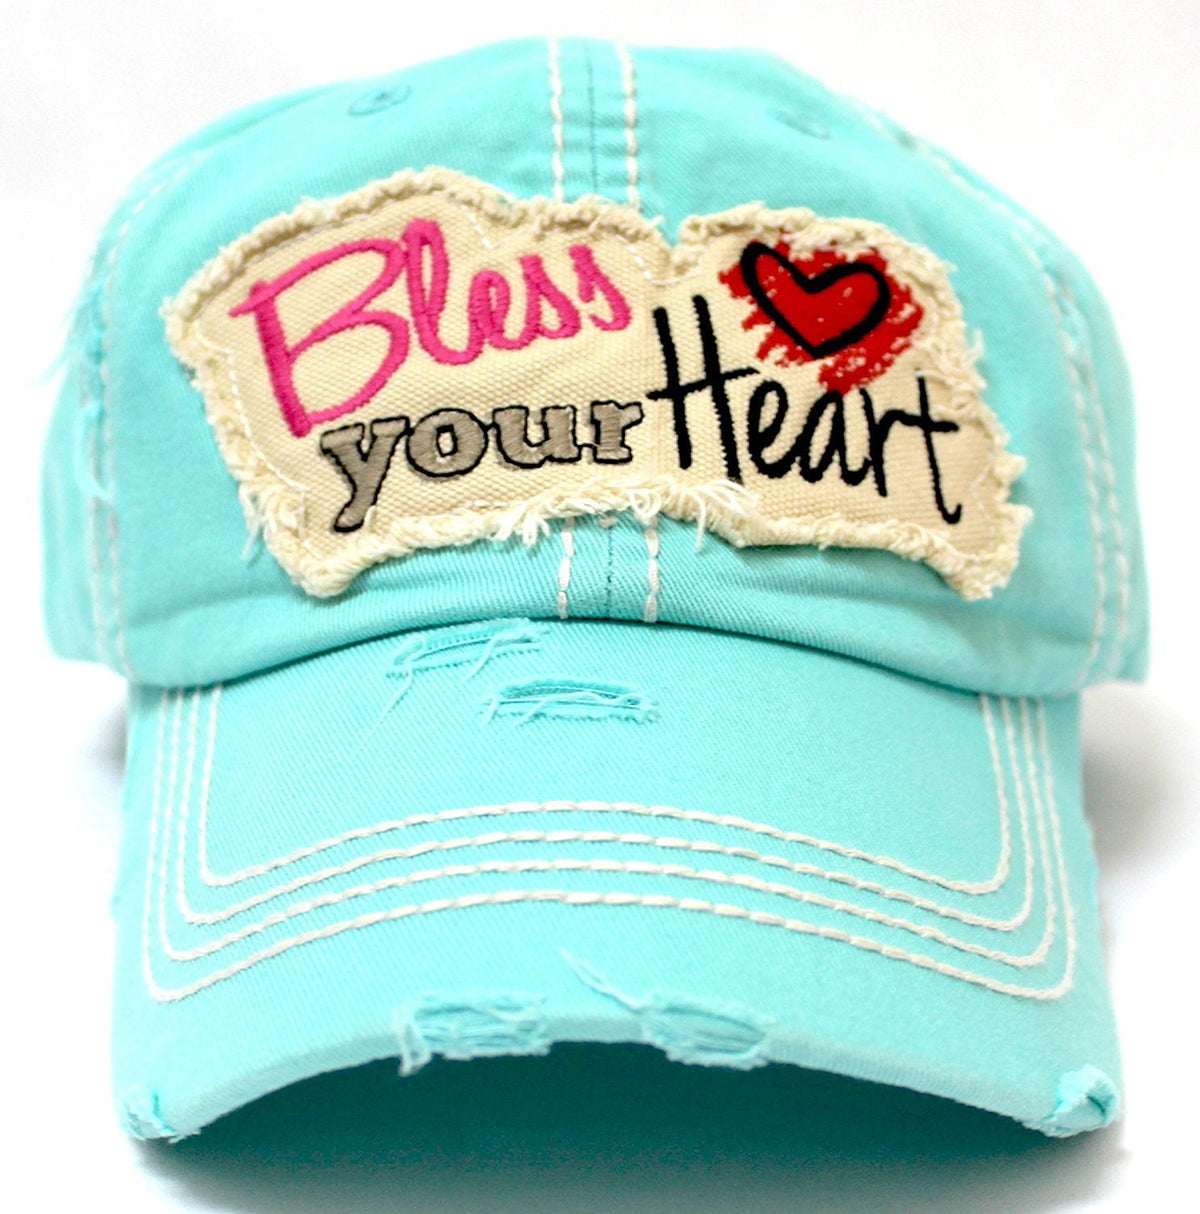 "Bless Your Heart" Patch on NEW! MINT Vintage Hat w/ Back <3 Detail - Caps 'N Vintage 